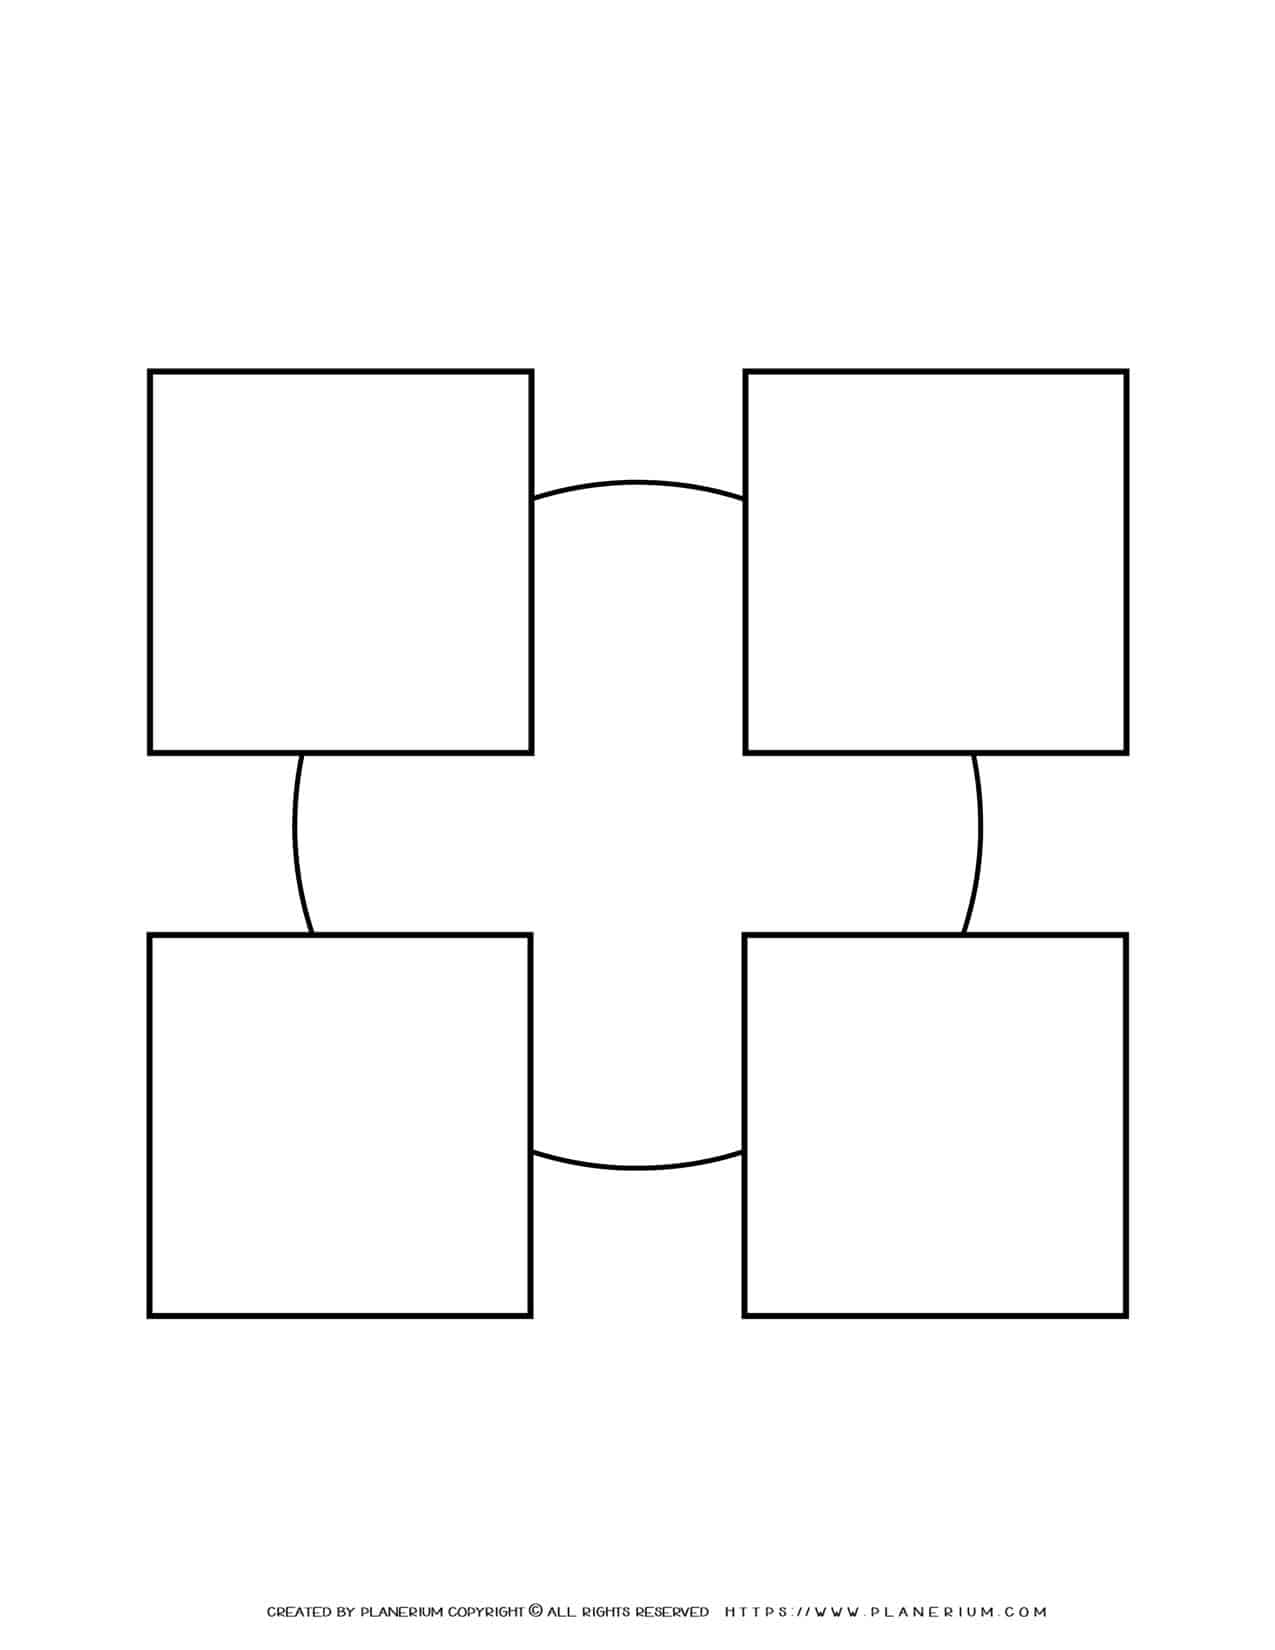 Sequence Chart Template - Four Squares on a Circle | Planerium